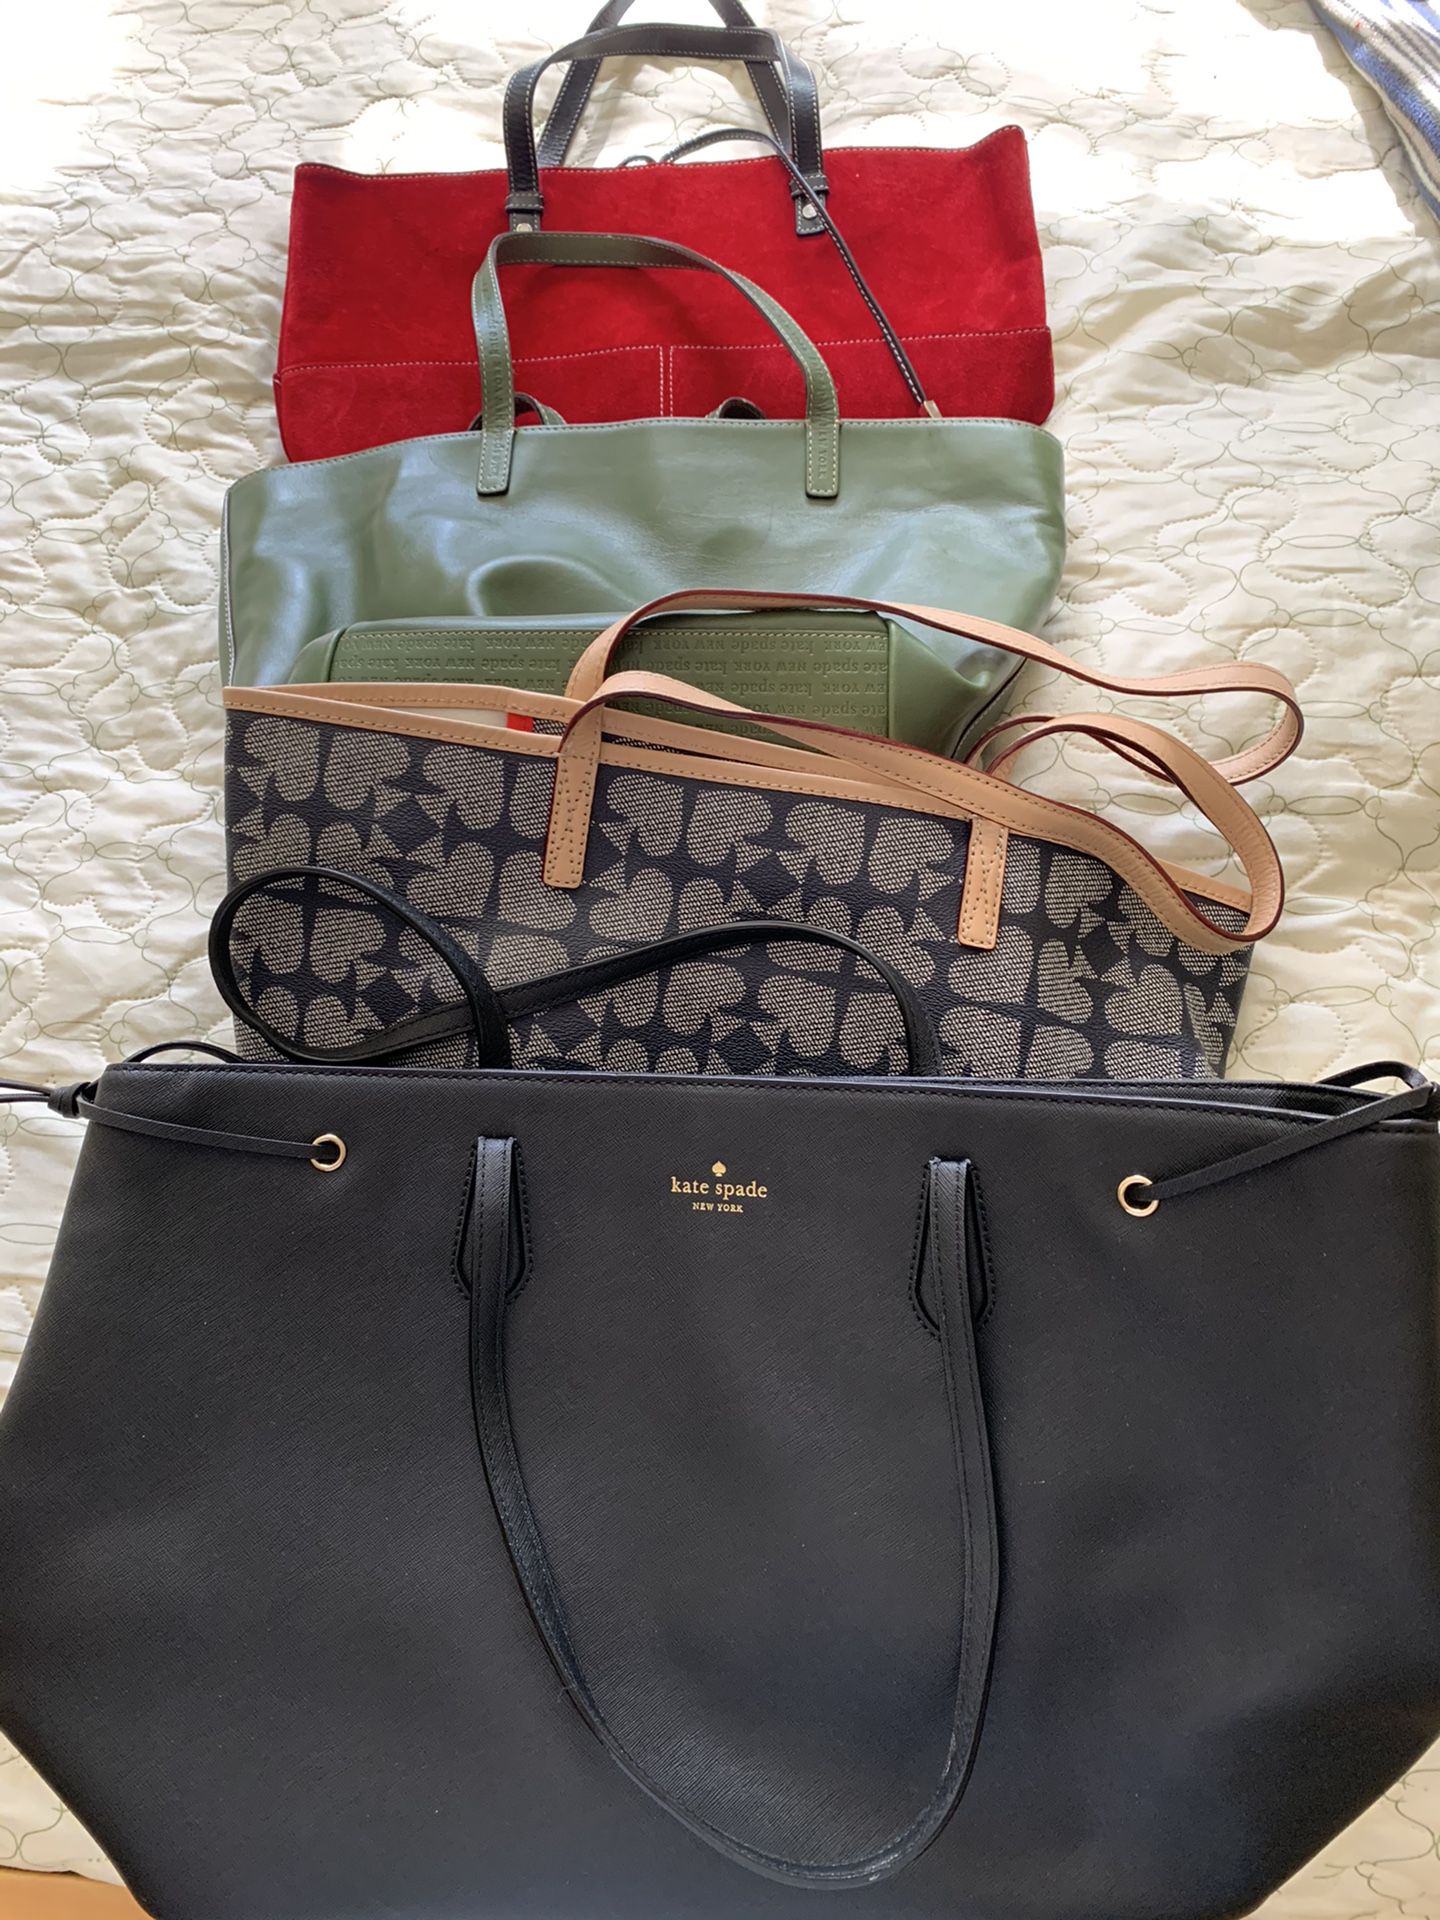 4 Kate spade bags. One w dust bag included .